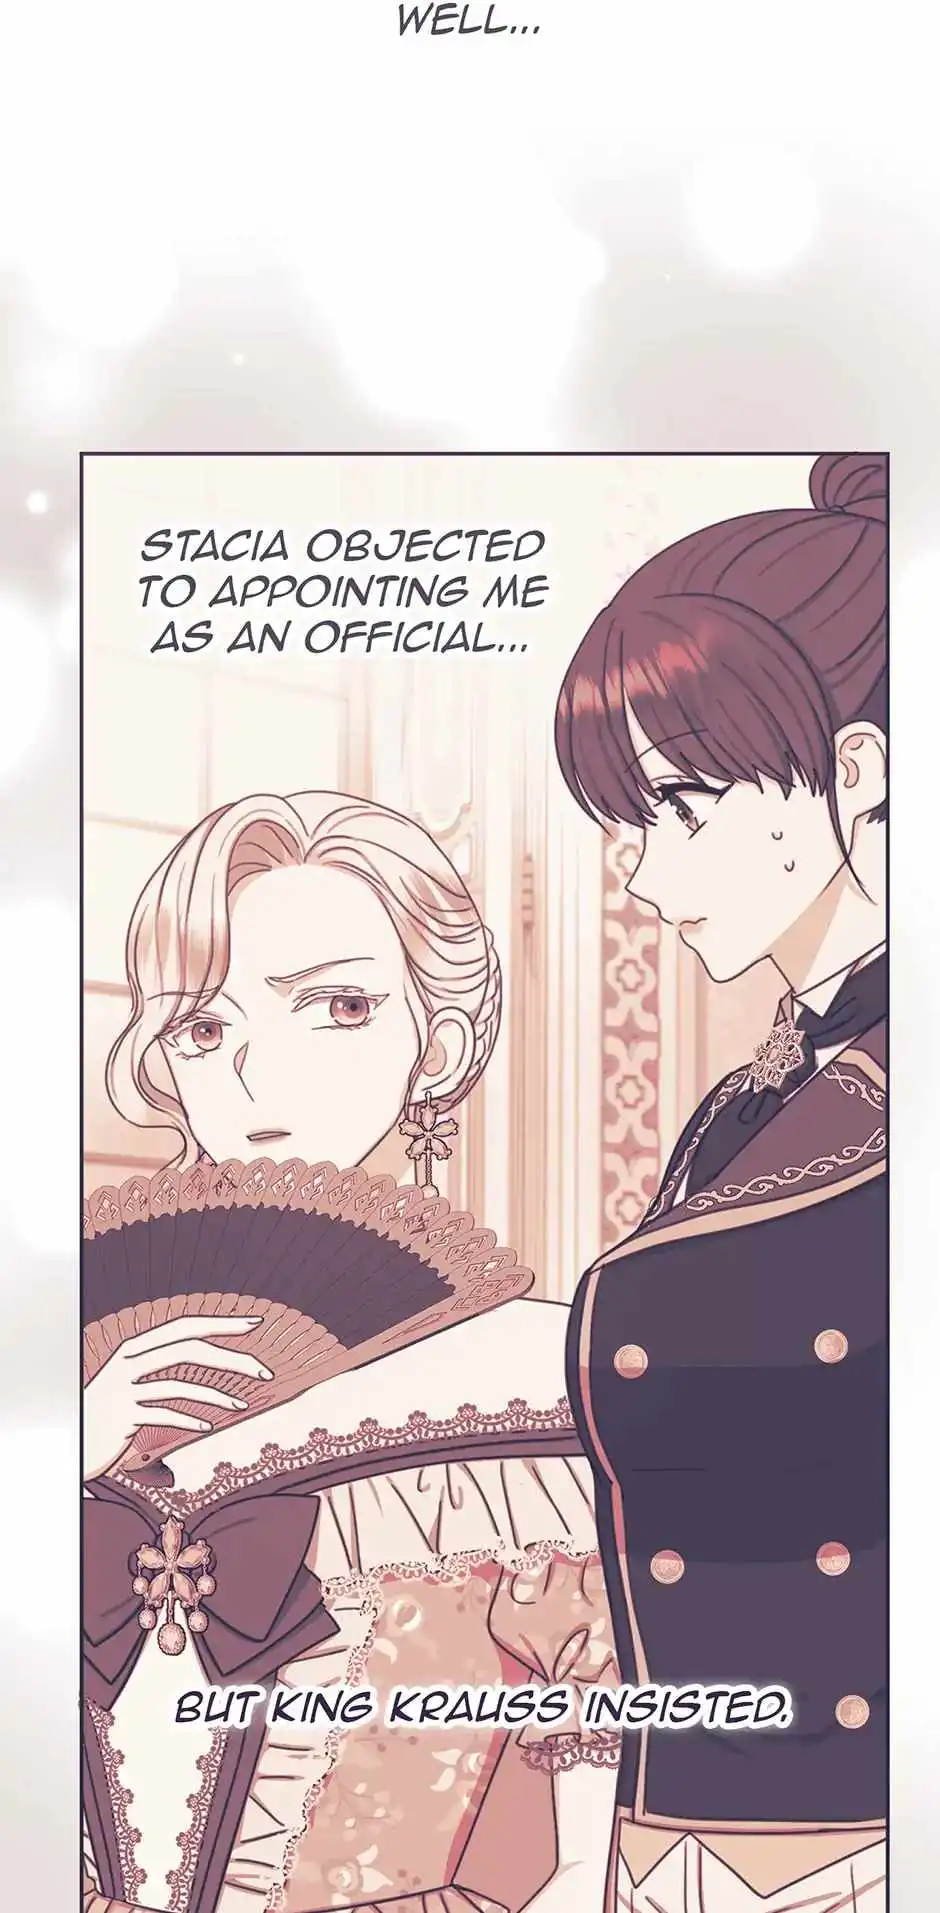 From Maid to Queen Chapter 47